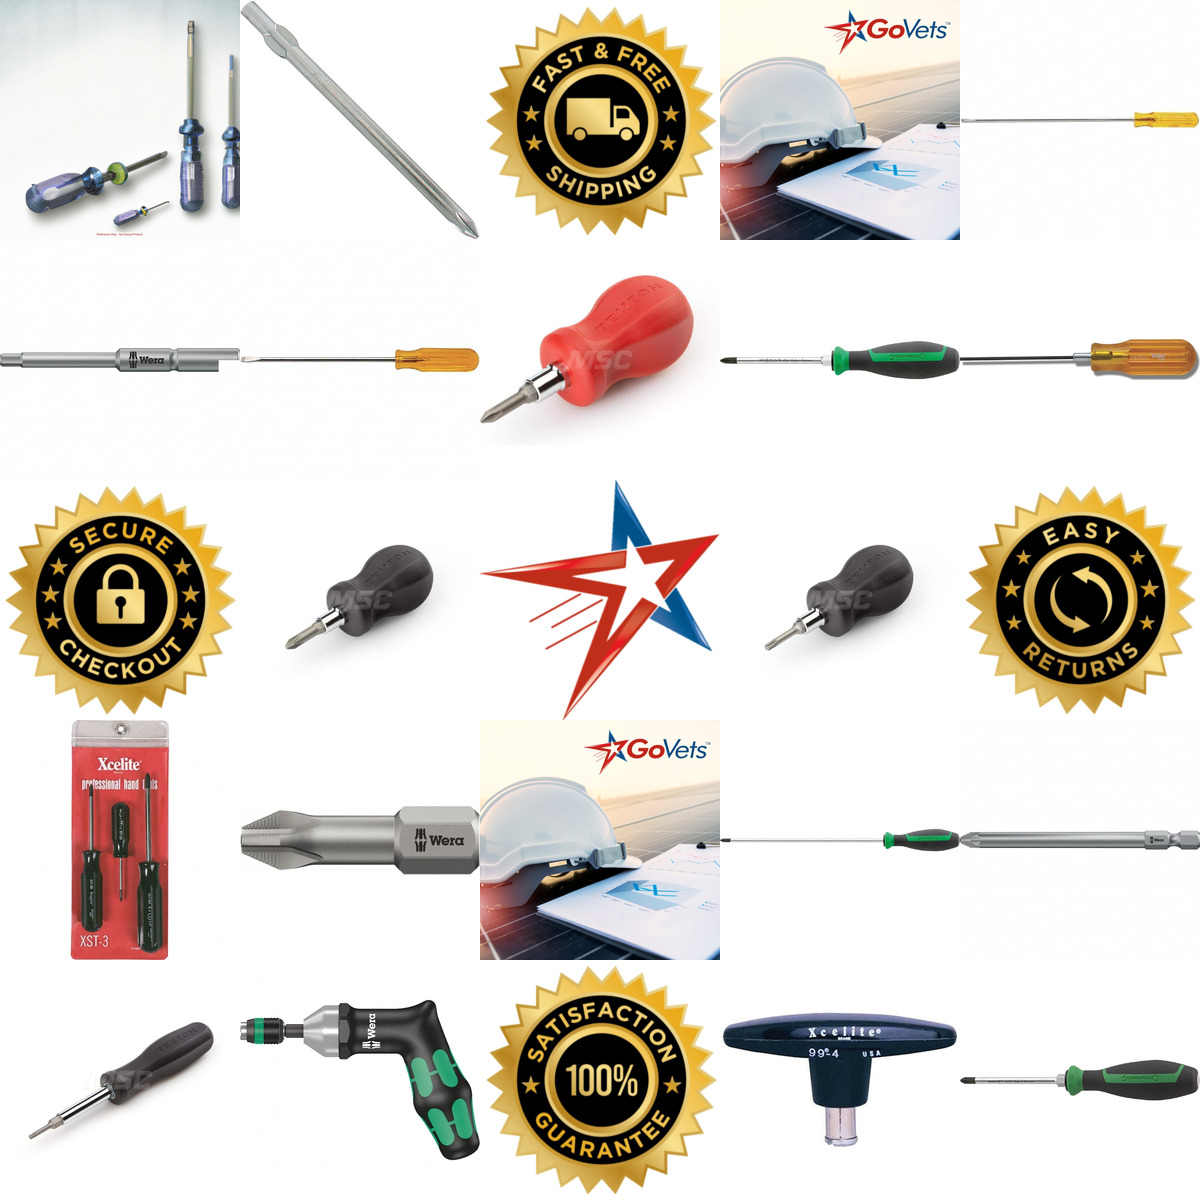 A selection of Hex Drivers and Accessories products on GoVets